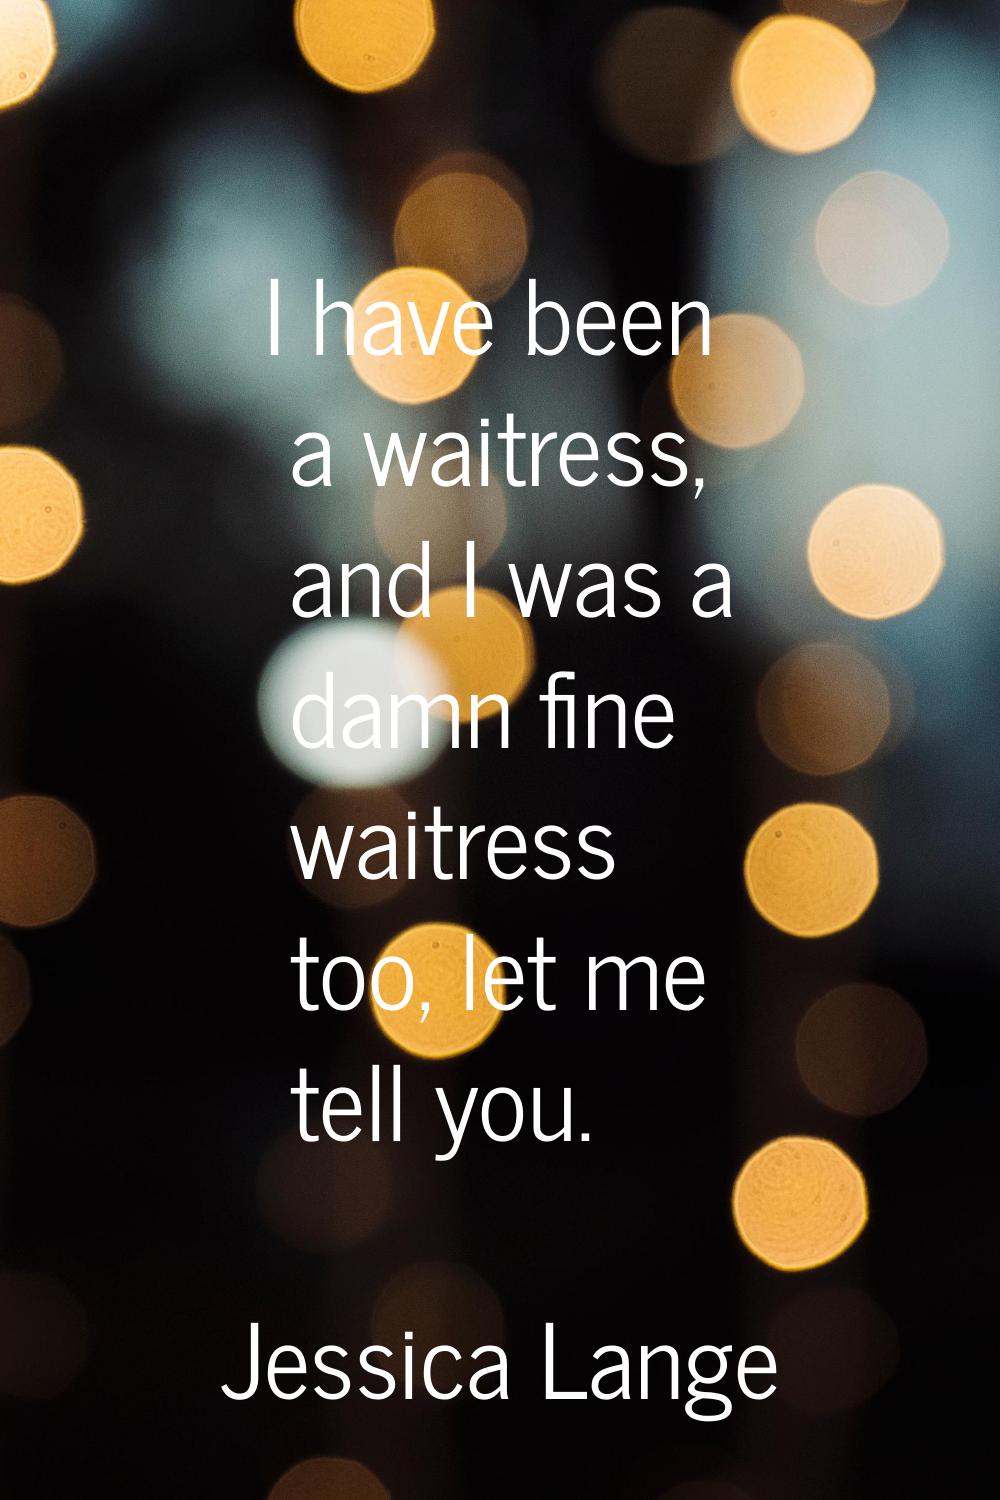 I have been a waitress, and I was a damn fine waitress too, let me tell you.